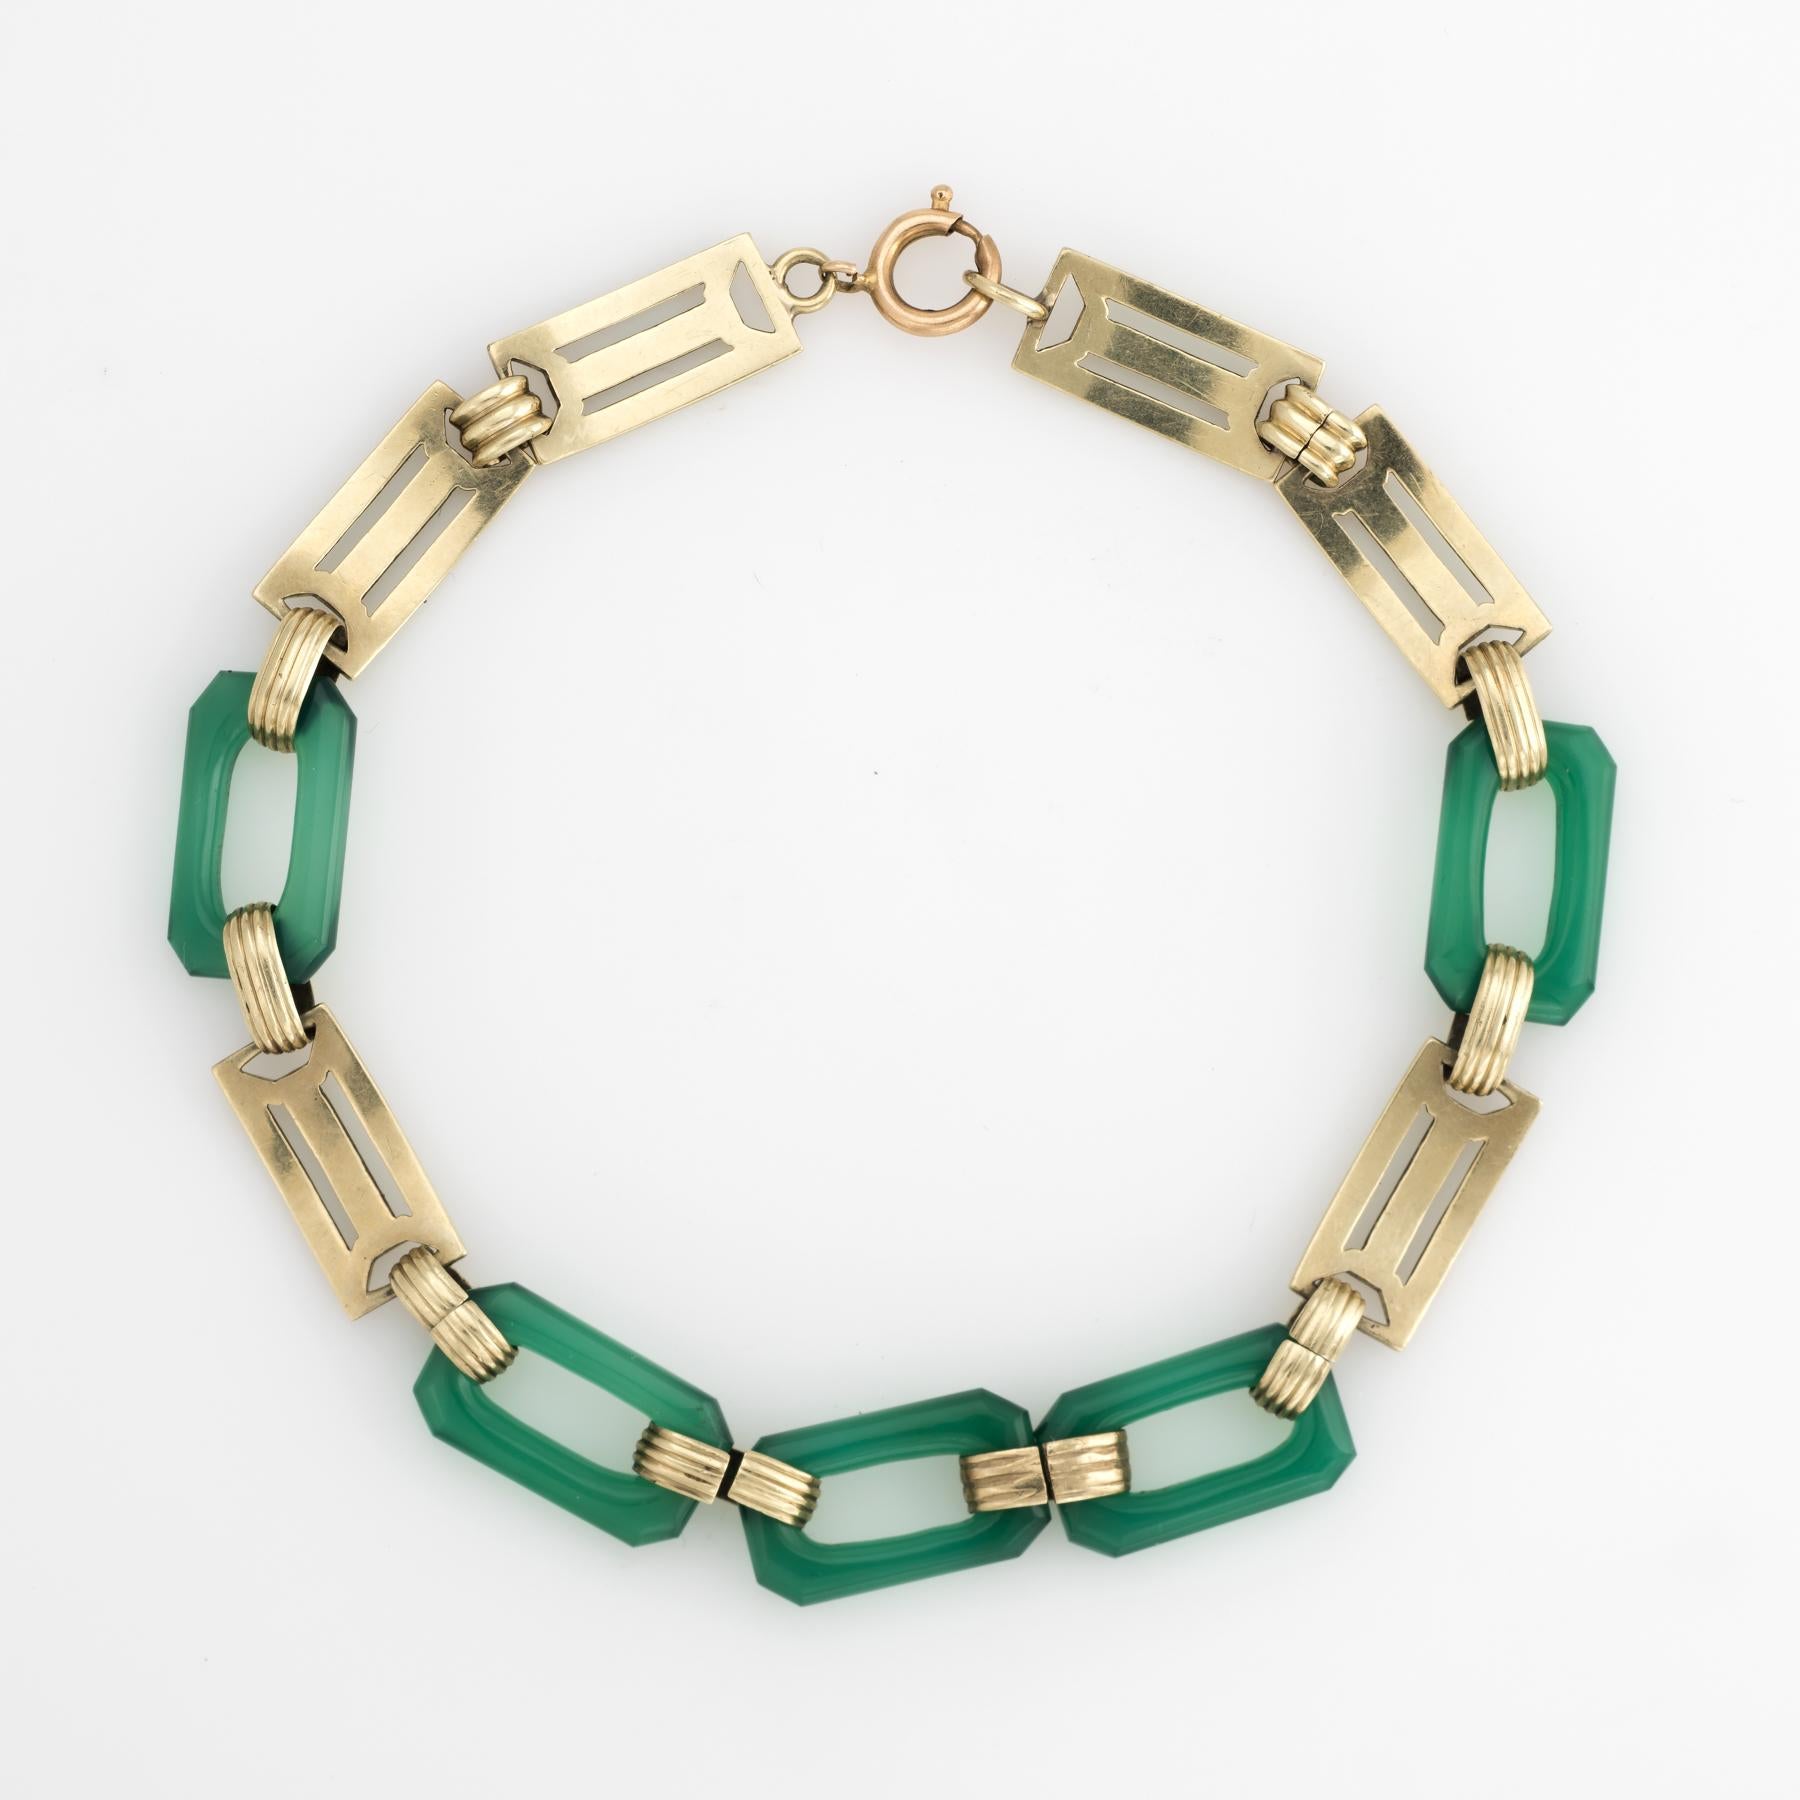 Elegant & finely detailed Art Deco era chrysoprase green enamel bracelet (circa 1930s to 1940s), crafted in 14 karat yellow gold. 

Square chrysoprase links each measure 16mm x 9mm. Each of the links are uniform in size and in excellent condition